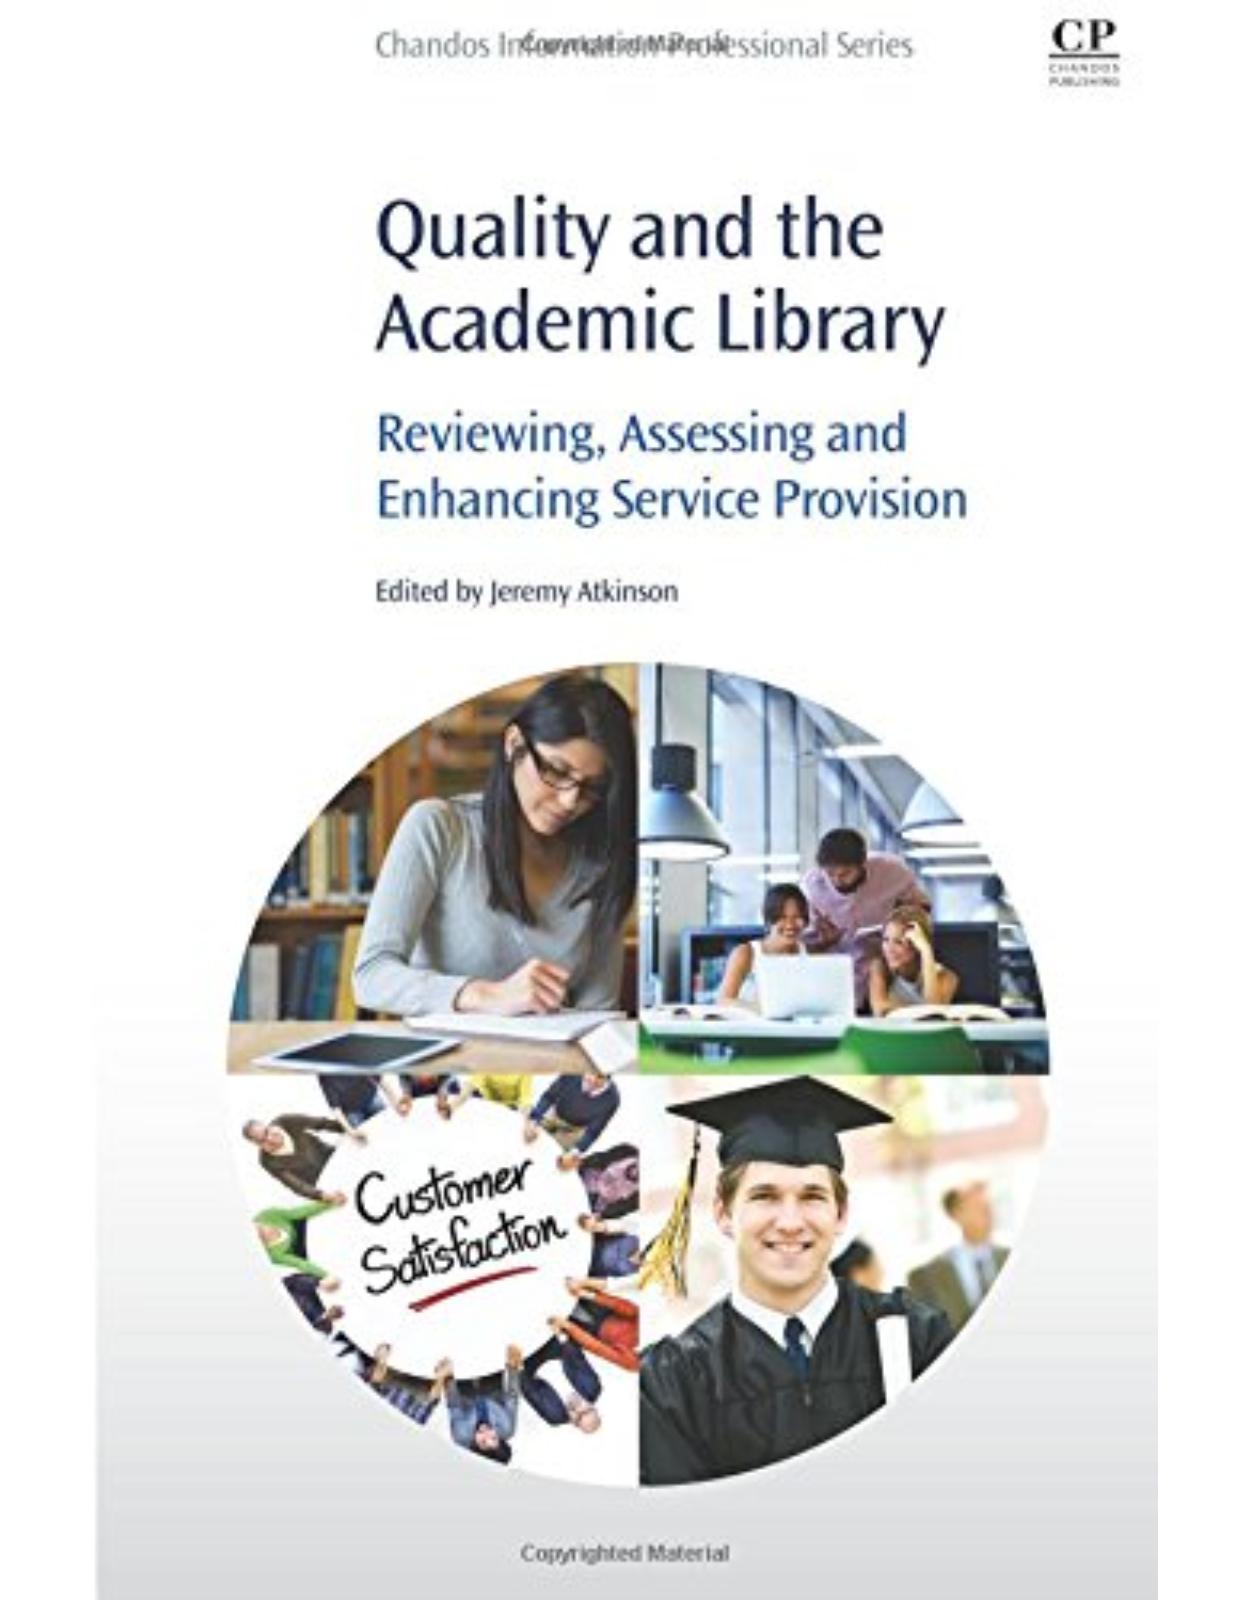 Quality and the Academic Library   Reviewing, Assessing and Enhancing Service Provision   By Jeremy Atkinson